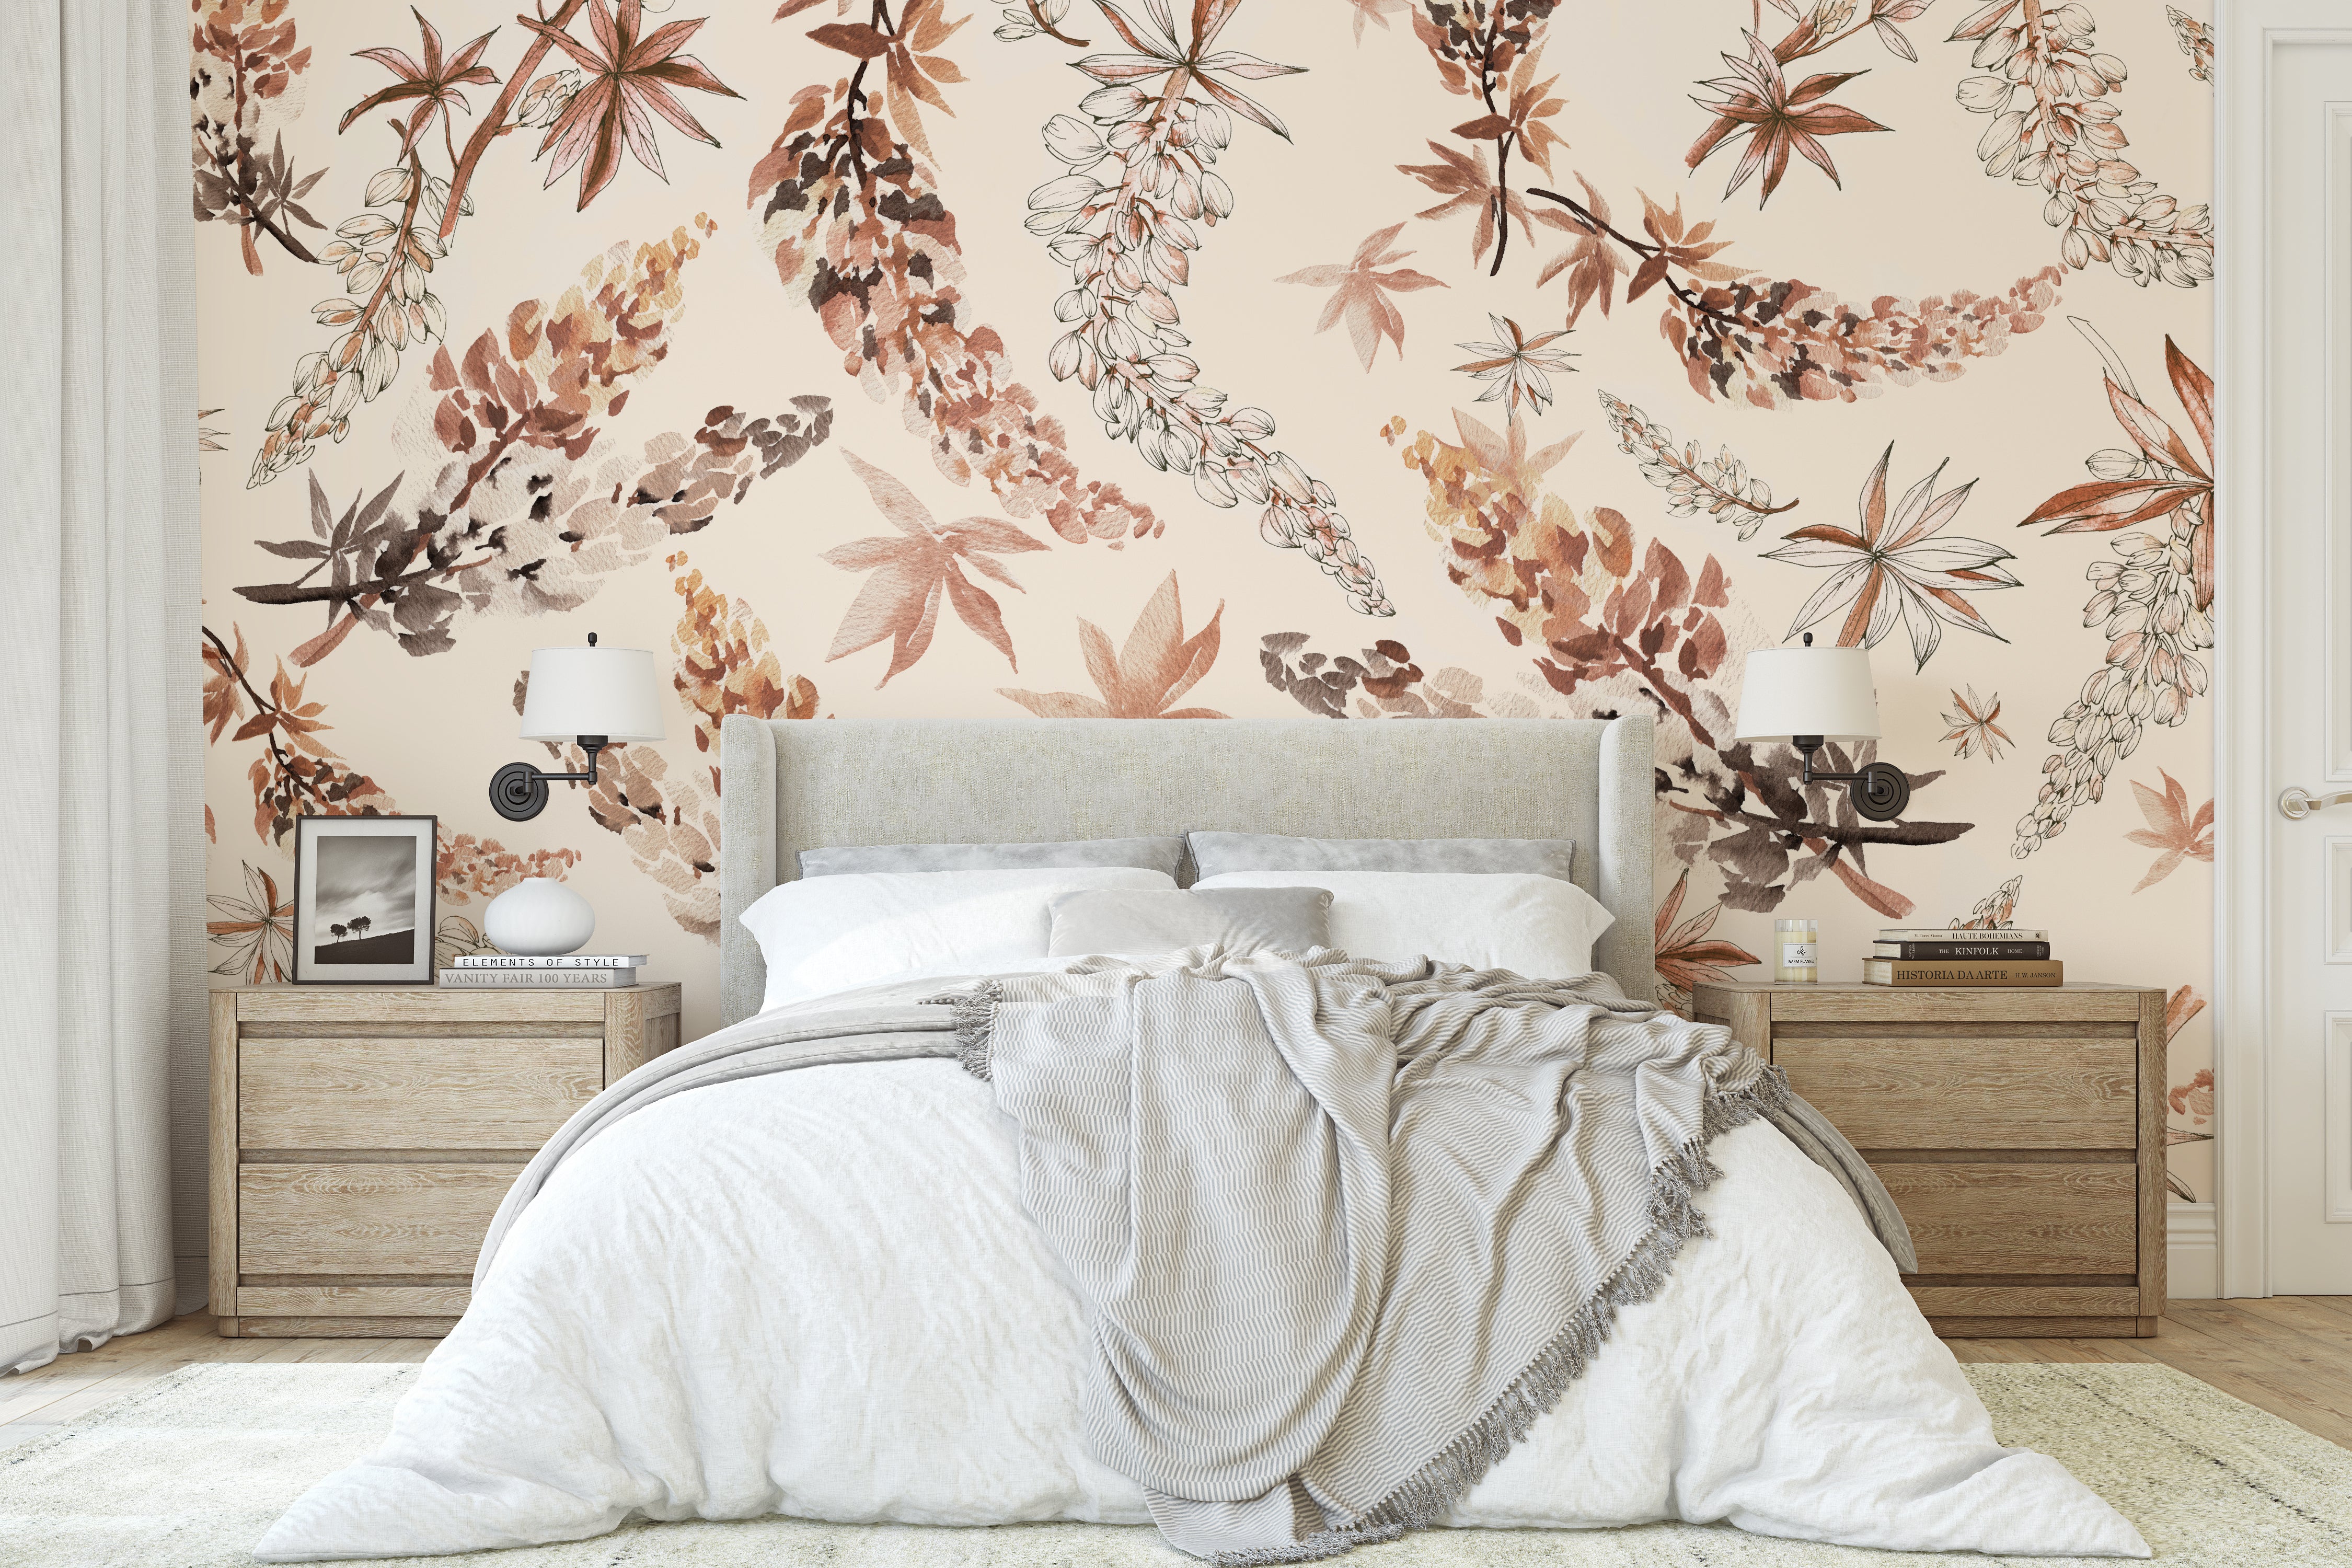 Piper’s Meadow Wallpaper - The Ania Zwara Line from WALL BLUSH